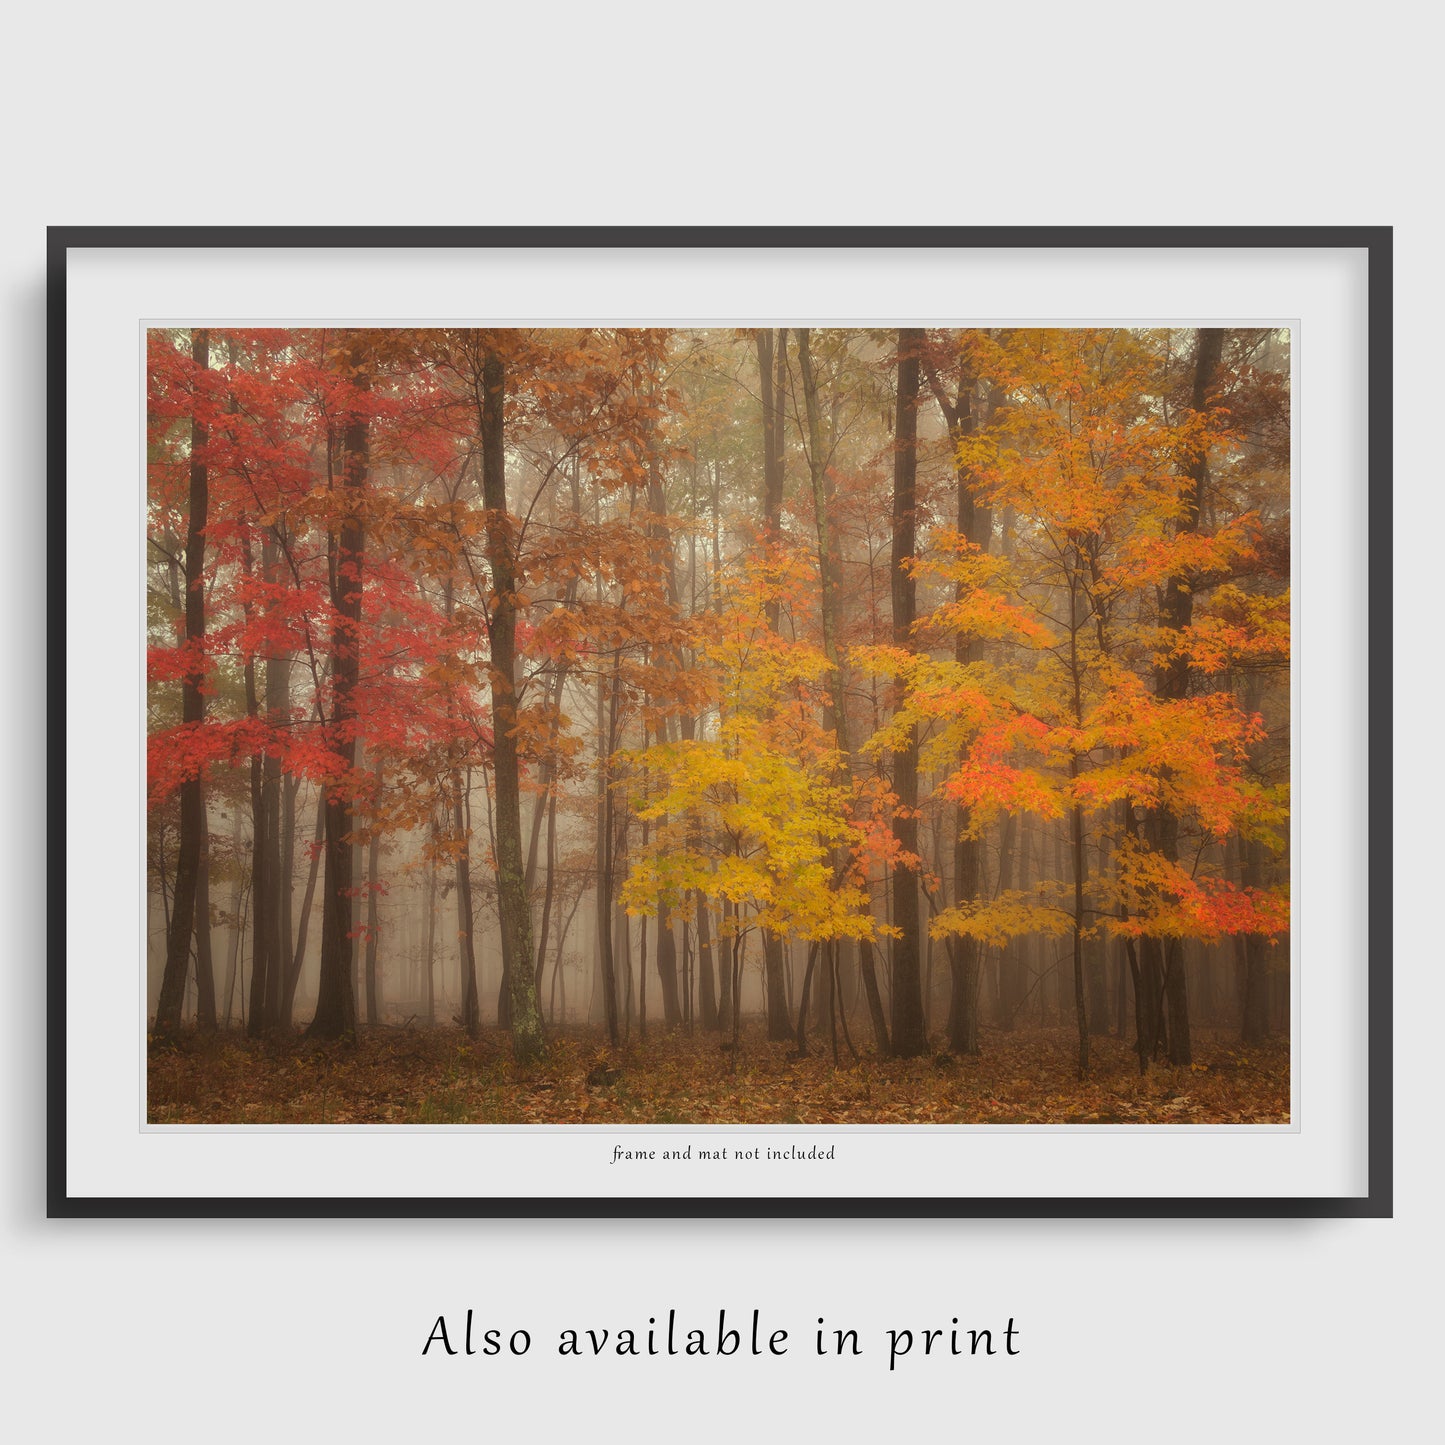 The fall photograph is beautifully presented as a framed print, showing this photograph is also available as a paper print. Please note that the frame and mat shown are for display purposes only and are not included in the purchase.